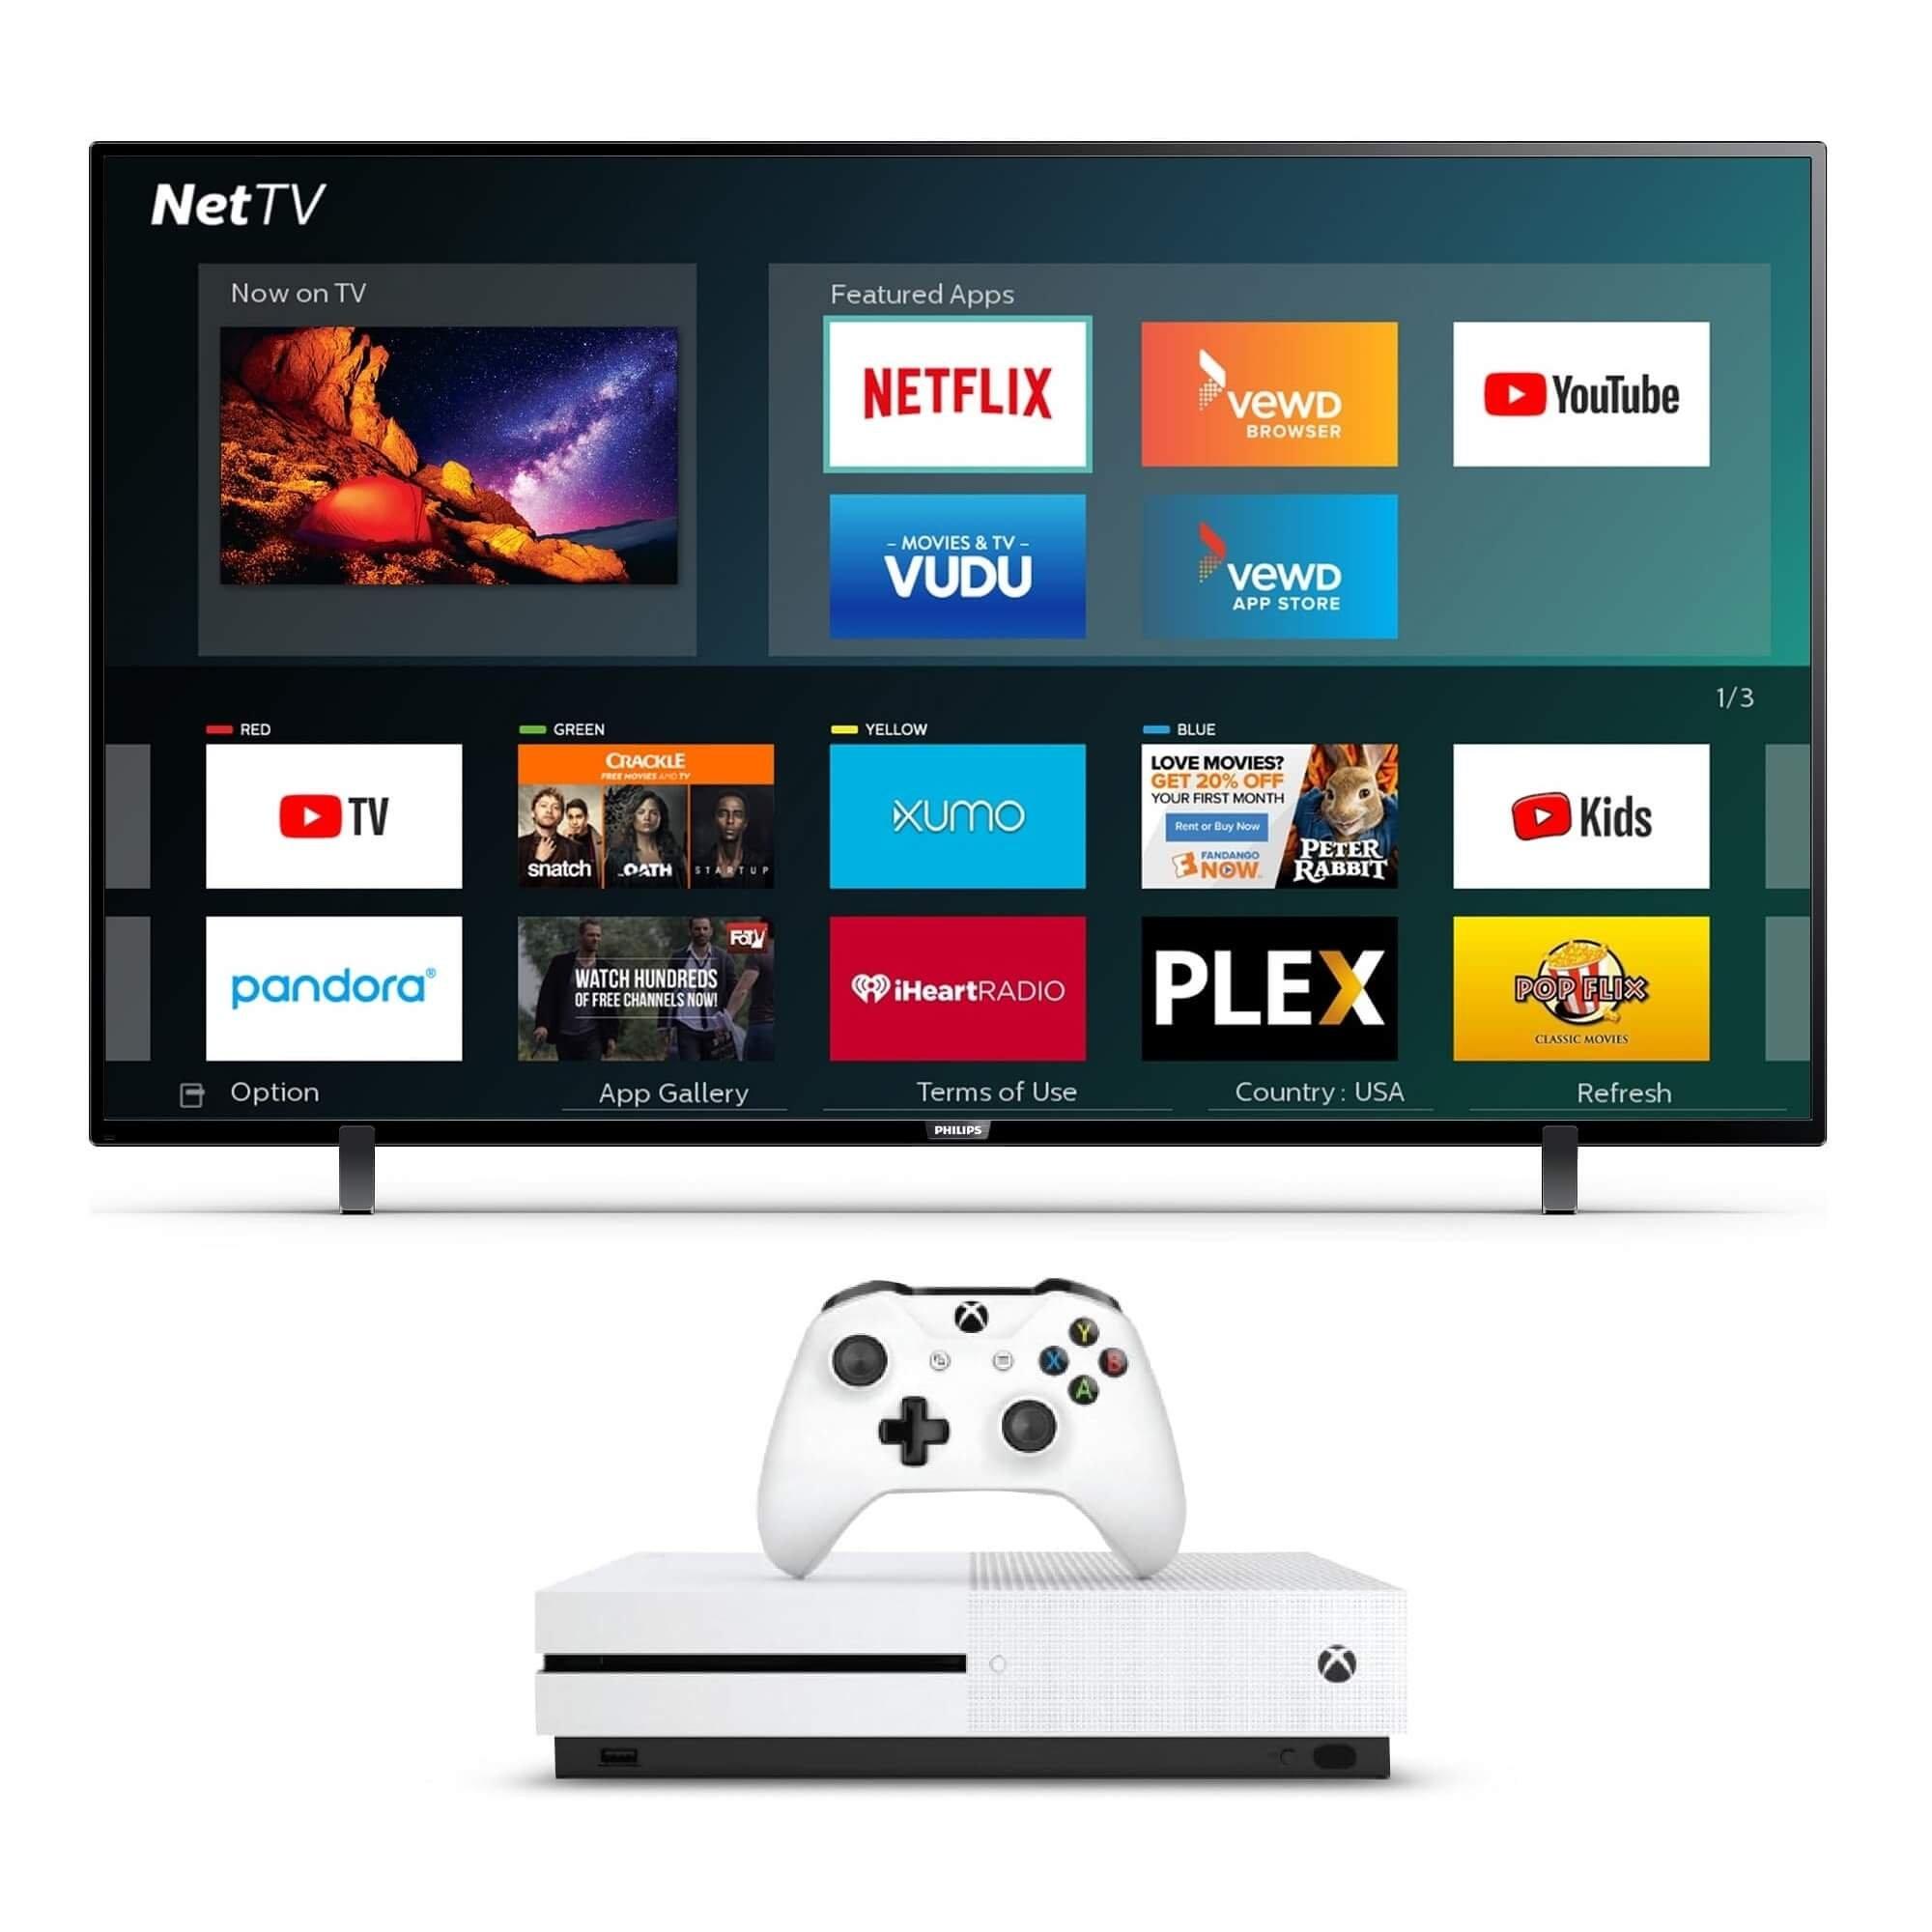 xbox one and tv bundle deals